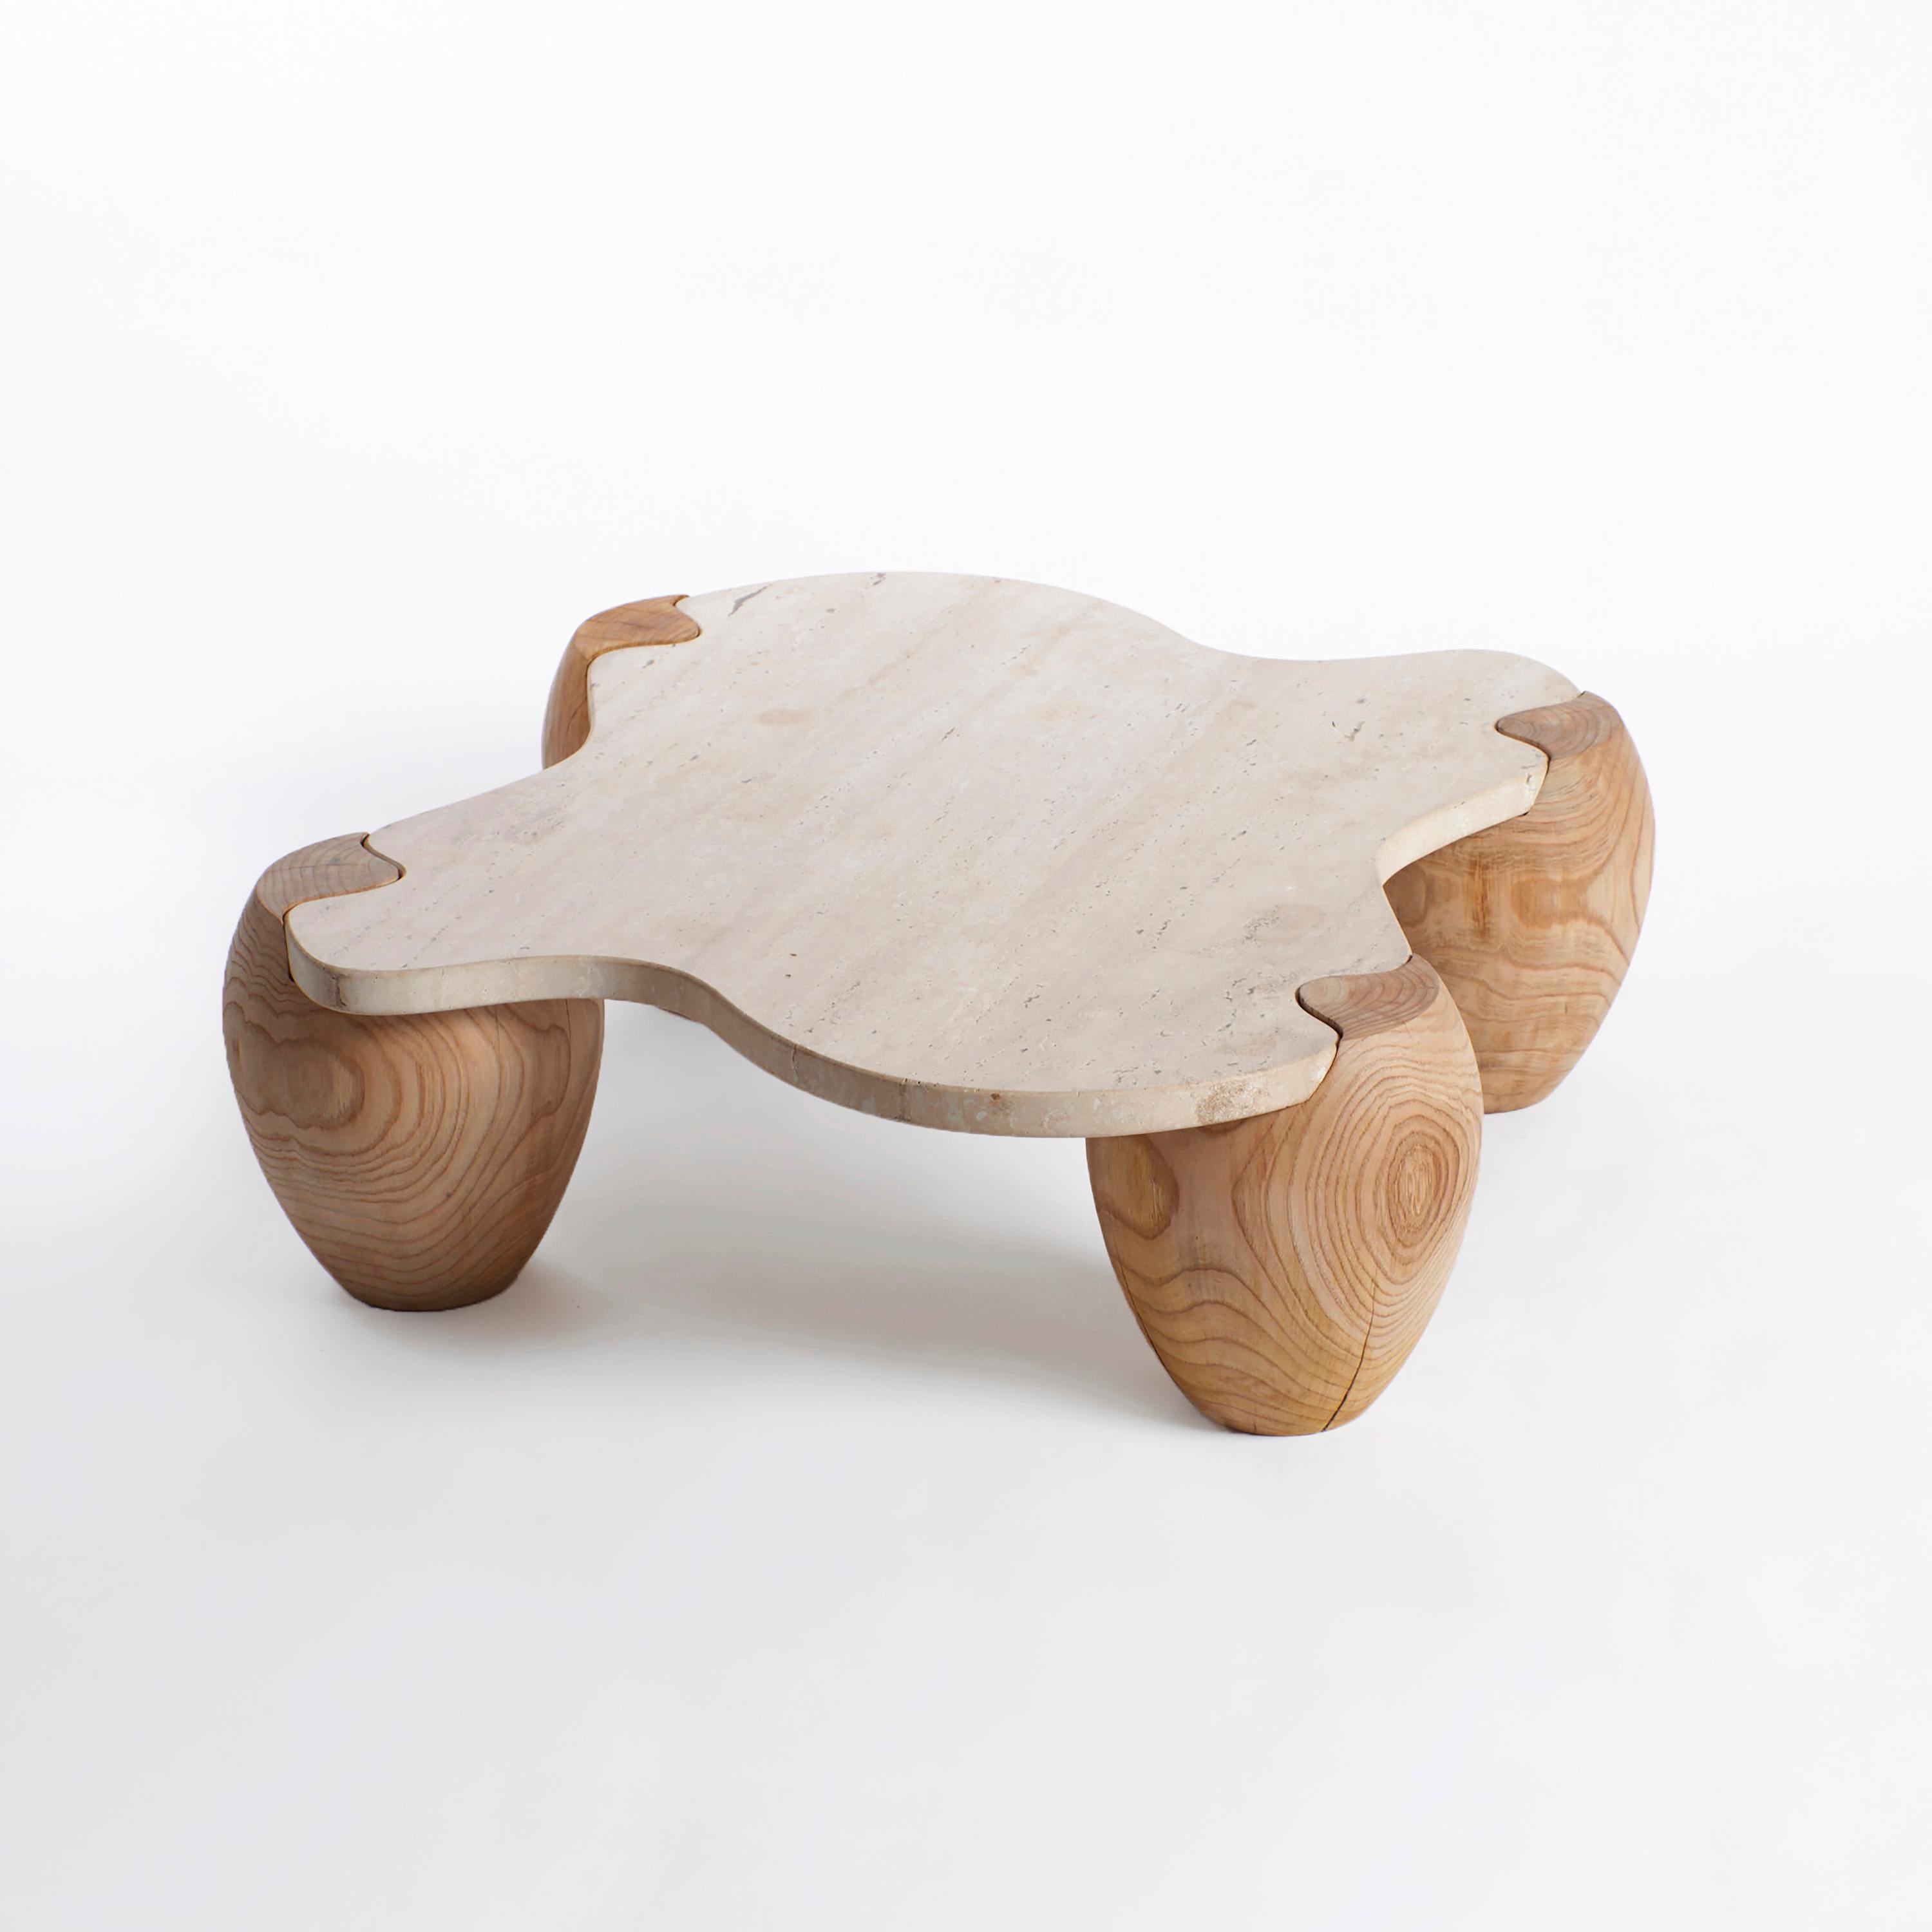 Alentejo Coffee Table by Project 213A
Dimensions: W 120 x D 93 x H 28 cm
Materials: Chestnut, Travertine.

This organic-shaped coffee table stands is made from Travertine and assembles like a puzzle onto the four wooden legs. Each legs is made from